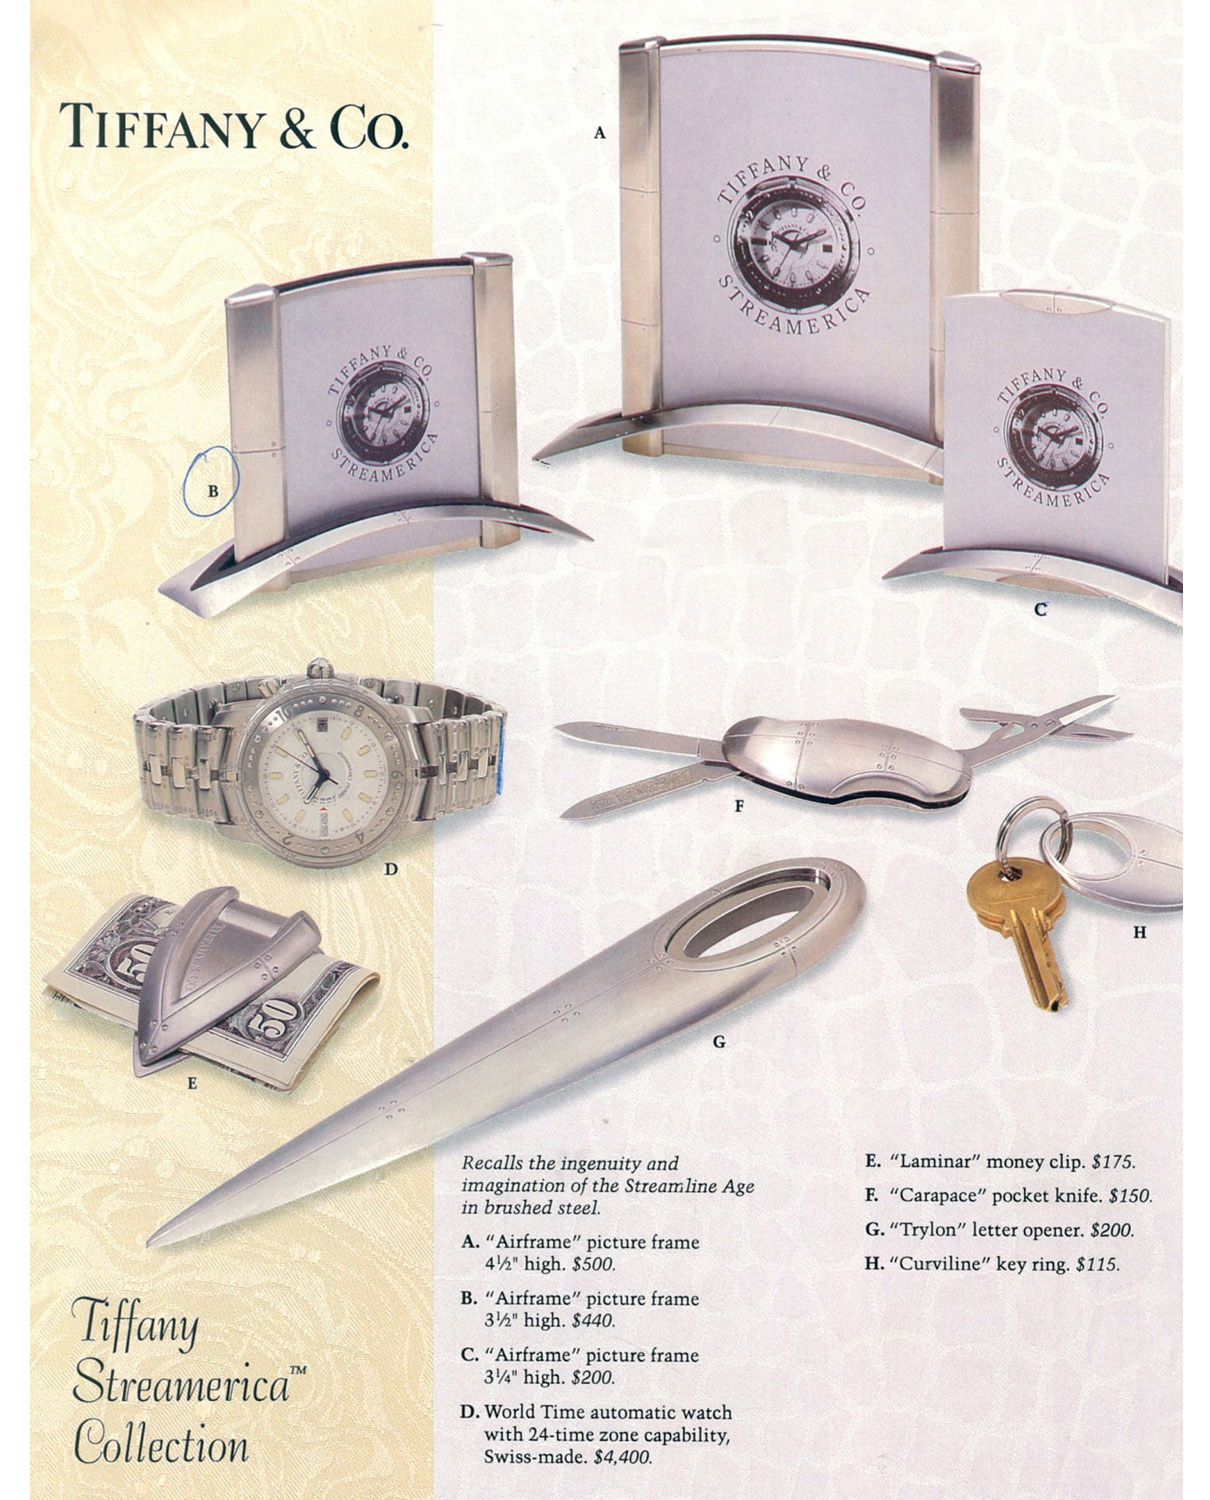 • Yamrun jewelers Tiffany Streamerica Collection 1993 Stainless Steel Airframe Picture Frames World Time Automatic Watch Carapace Pocket Knife Laminar Money Clip, Trylon Letter Opener, and Curviline Key Ring, all with 1993 prices.